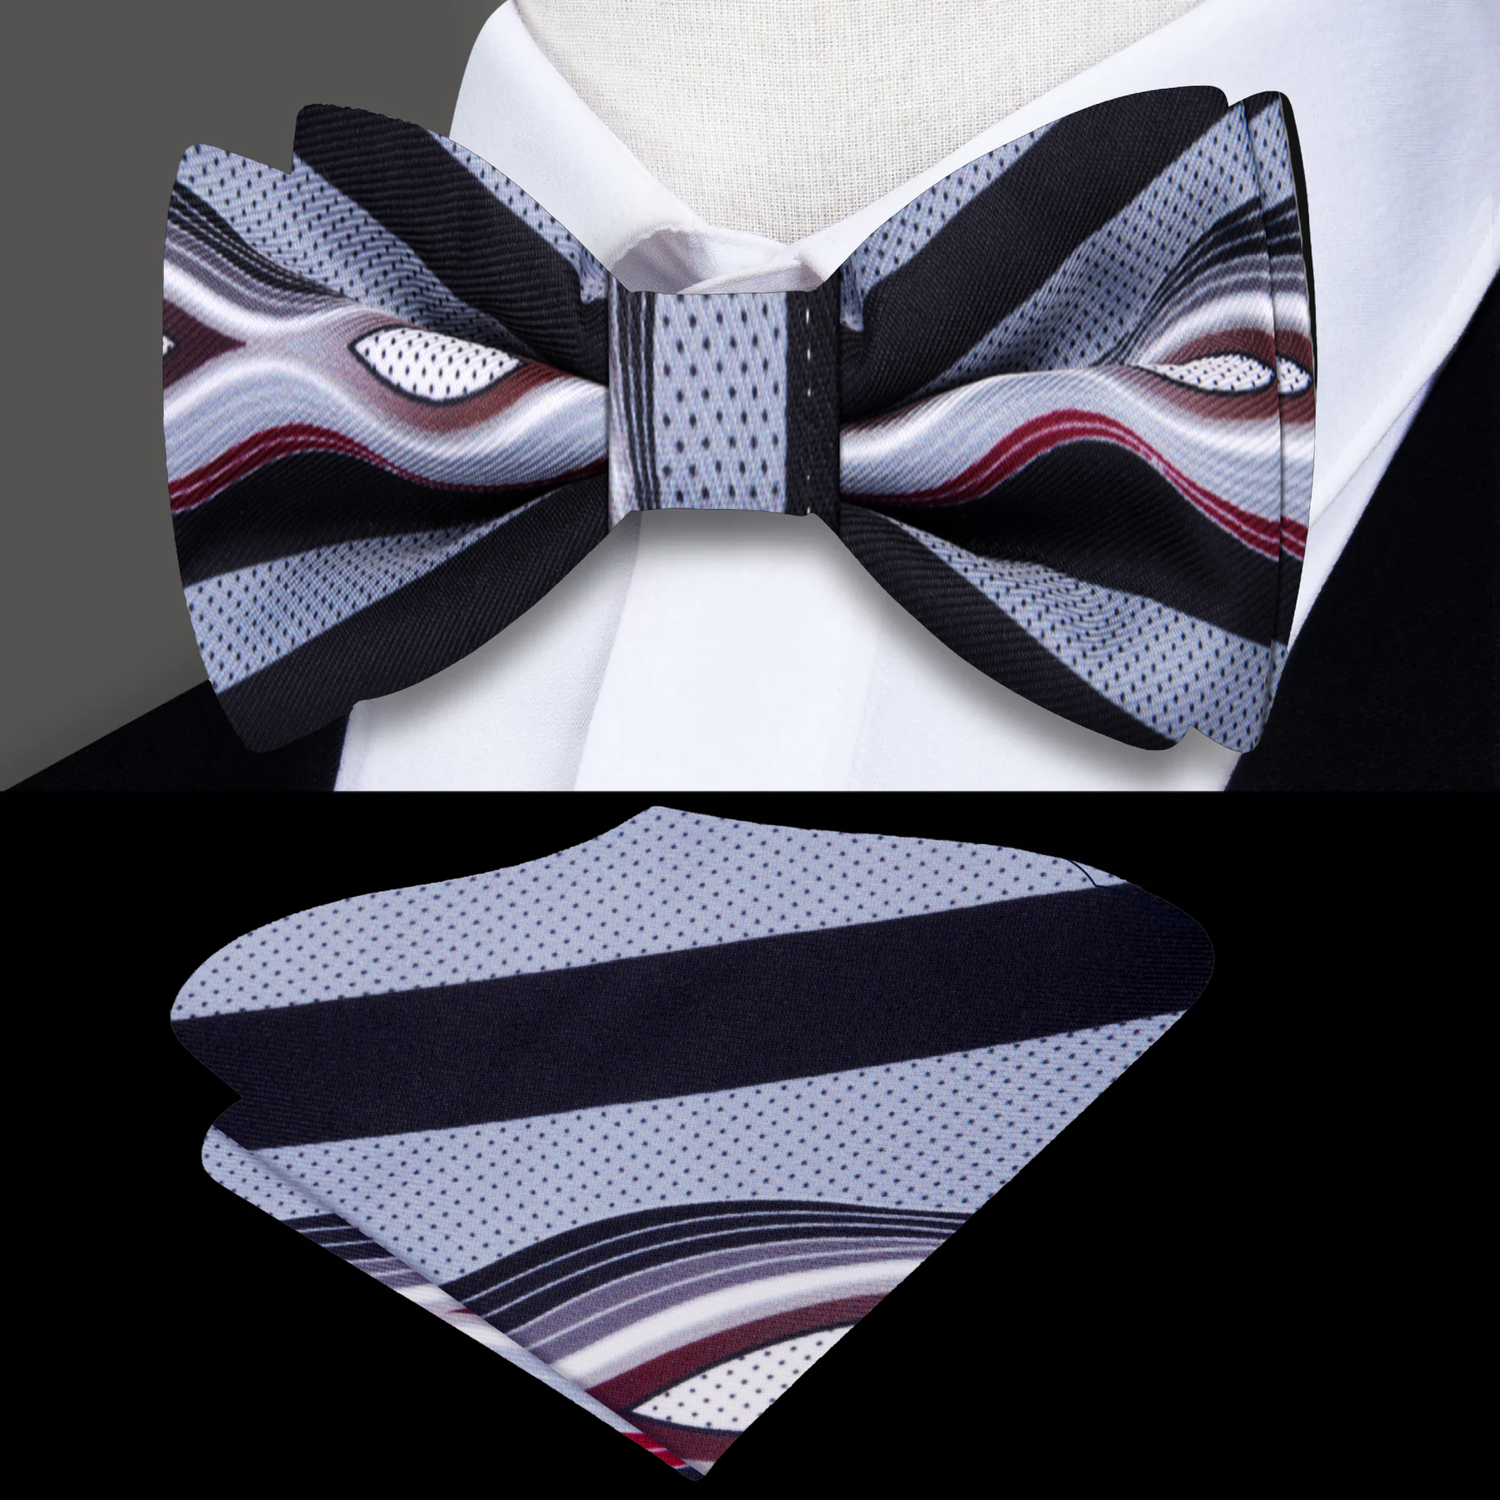 Main: Fog Grey, Black, Deep Red Abstract Bow Tie and Pocket Square||Fog Grey